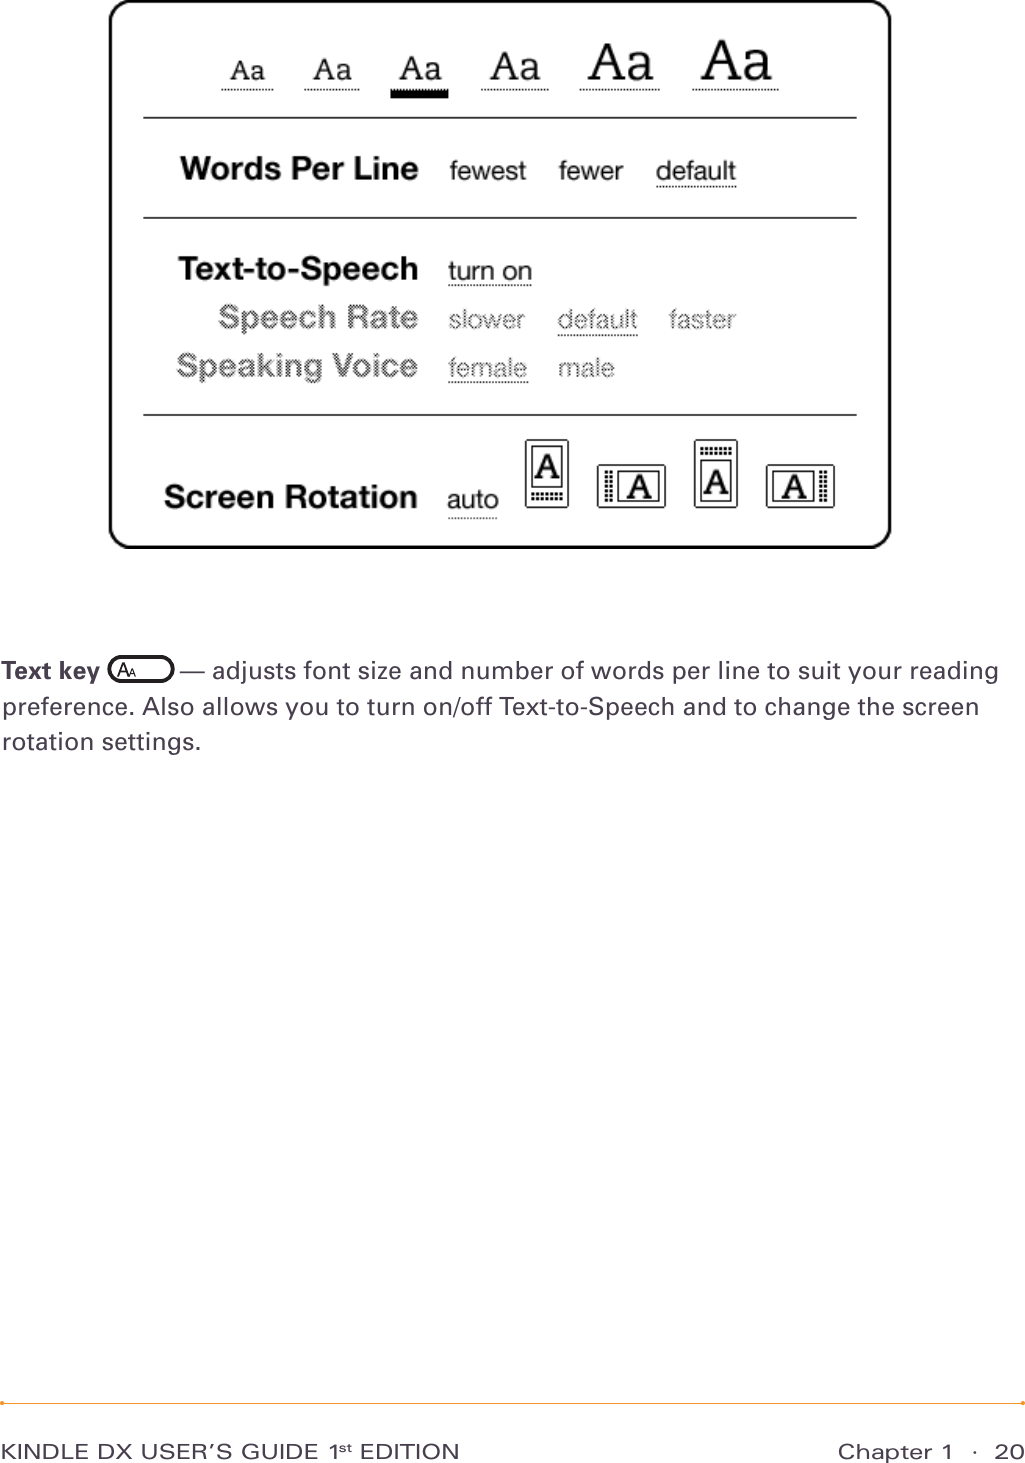 Chapter 1  ·  20KINDLE DX USER’S GUIDE 1st EDITIONText key   — adjusts font size and number of words per line to suit your reading preference. Also allows you to turn on/off Text-to-Speech and to change the screen rotation settings.